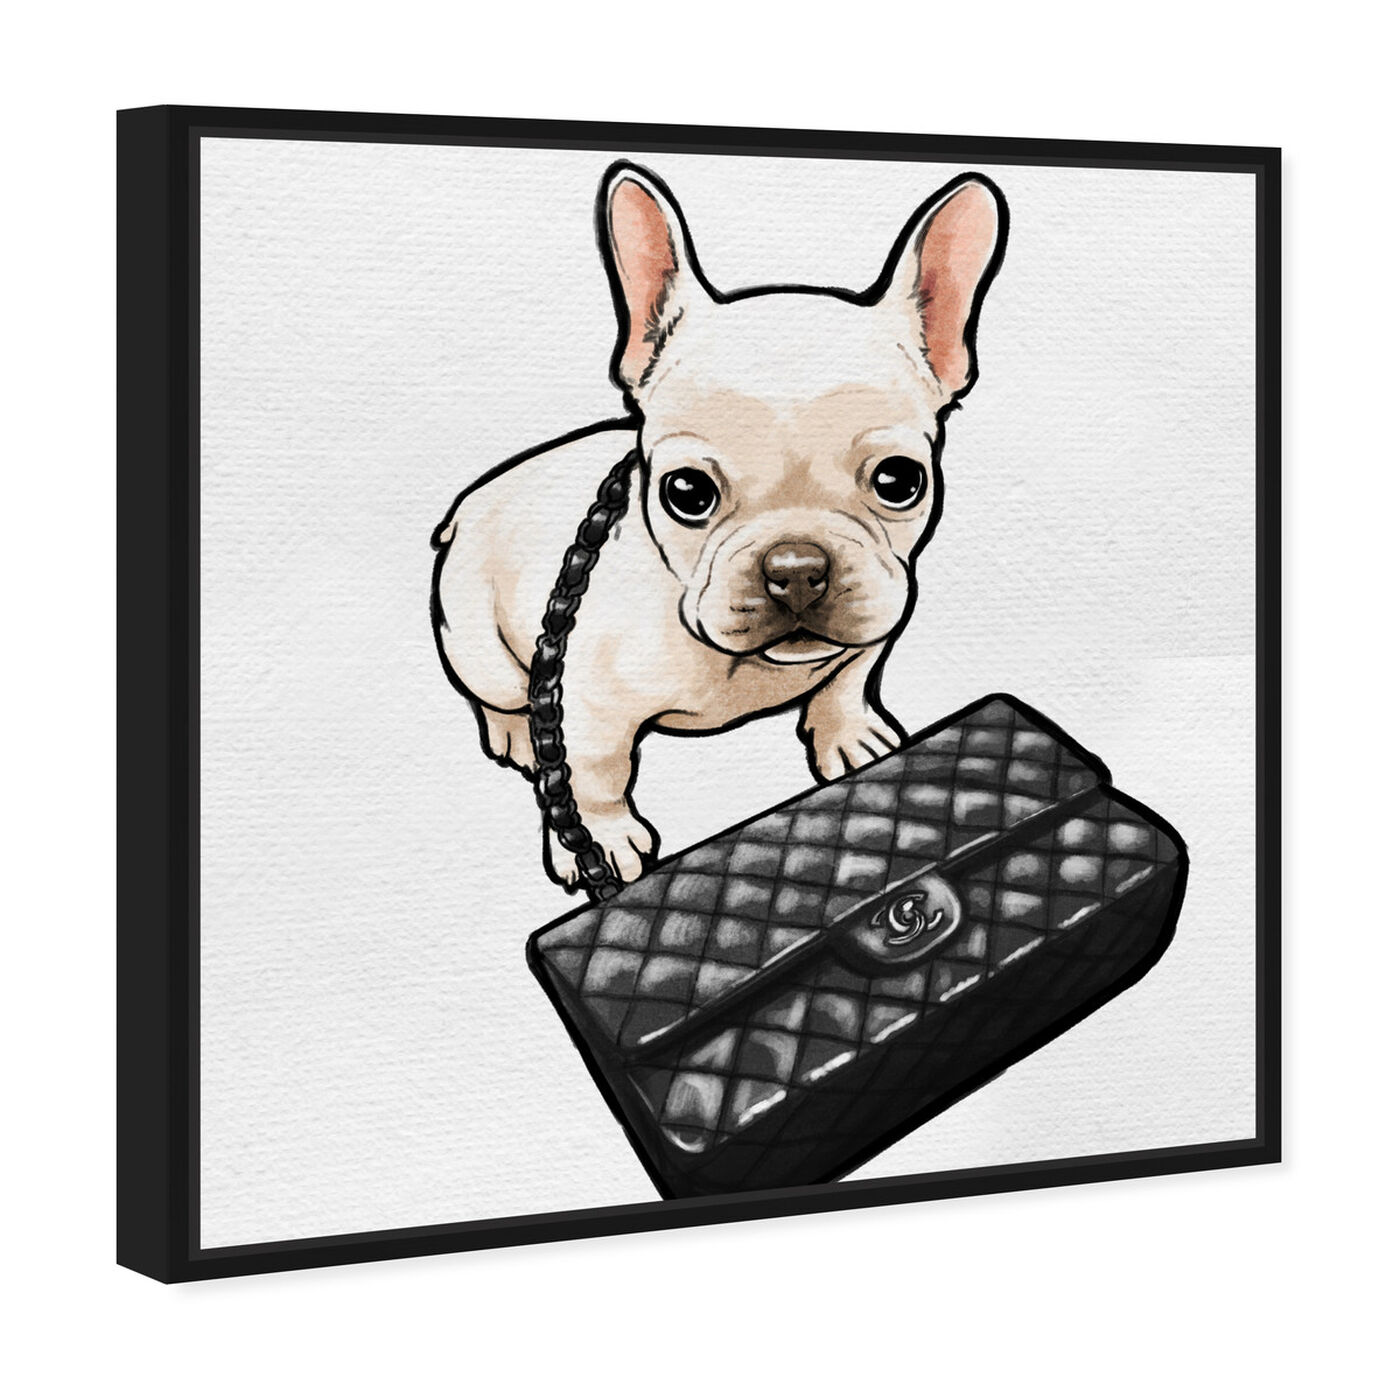 Angled view of Classy Frenchie featuring animals and dogs and puppies art.